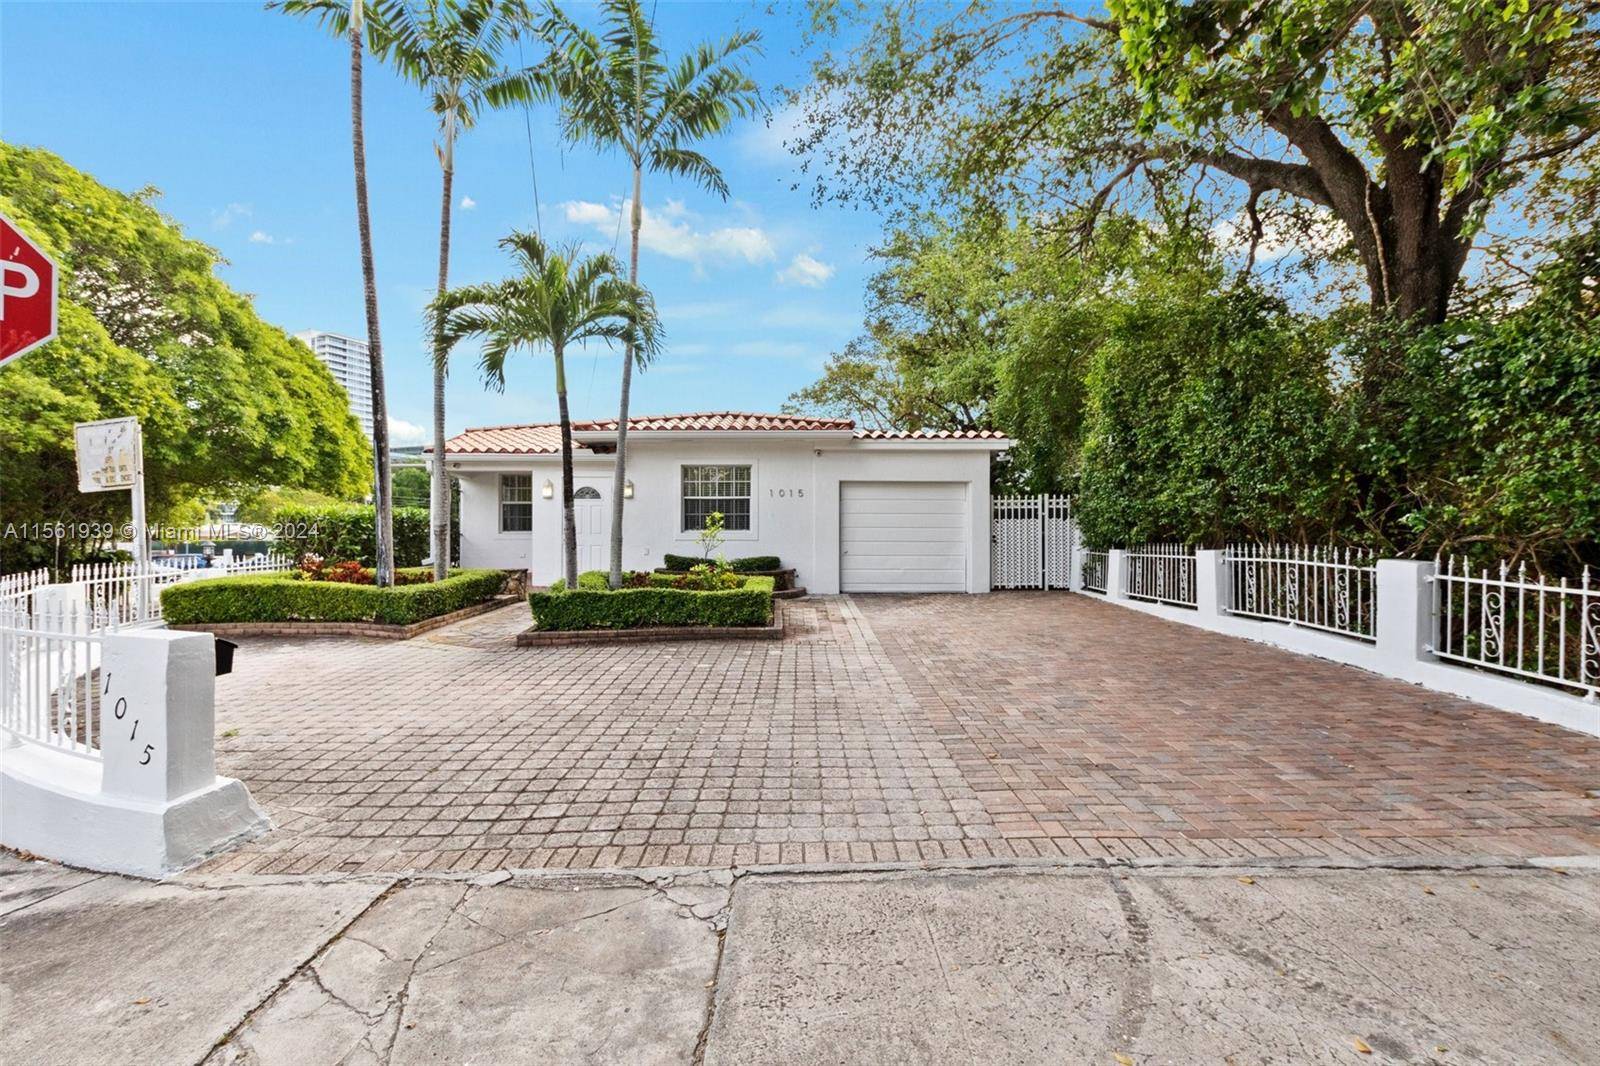 You're invited to come see this charming home located across the natural splendors of the Miami River District and the neighboring Sewell Park.